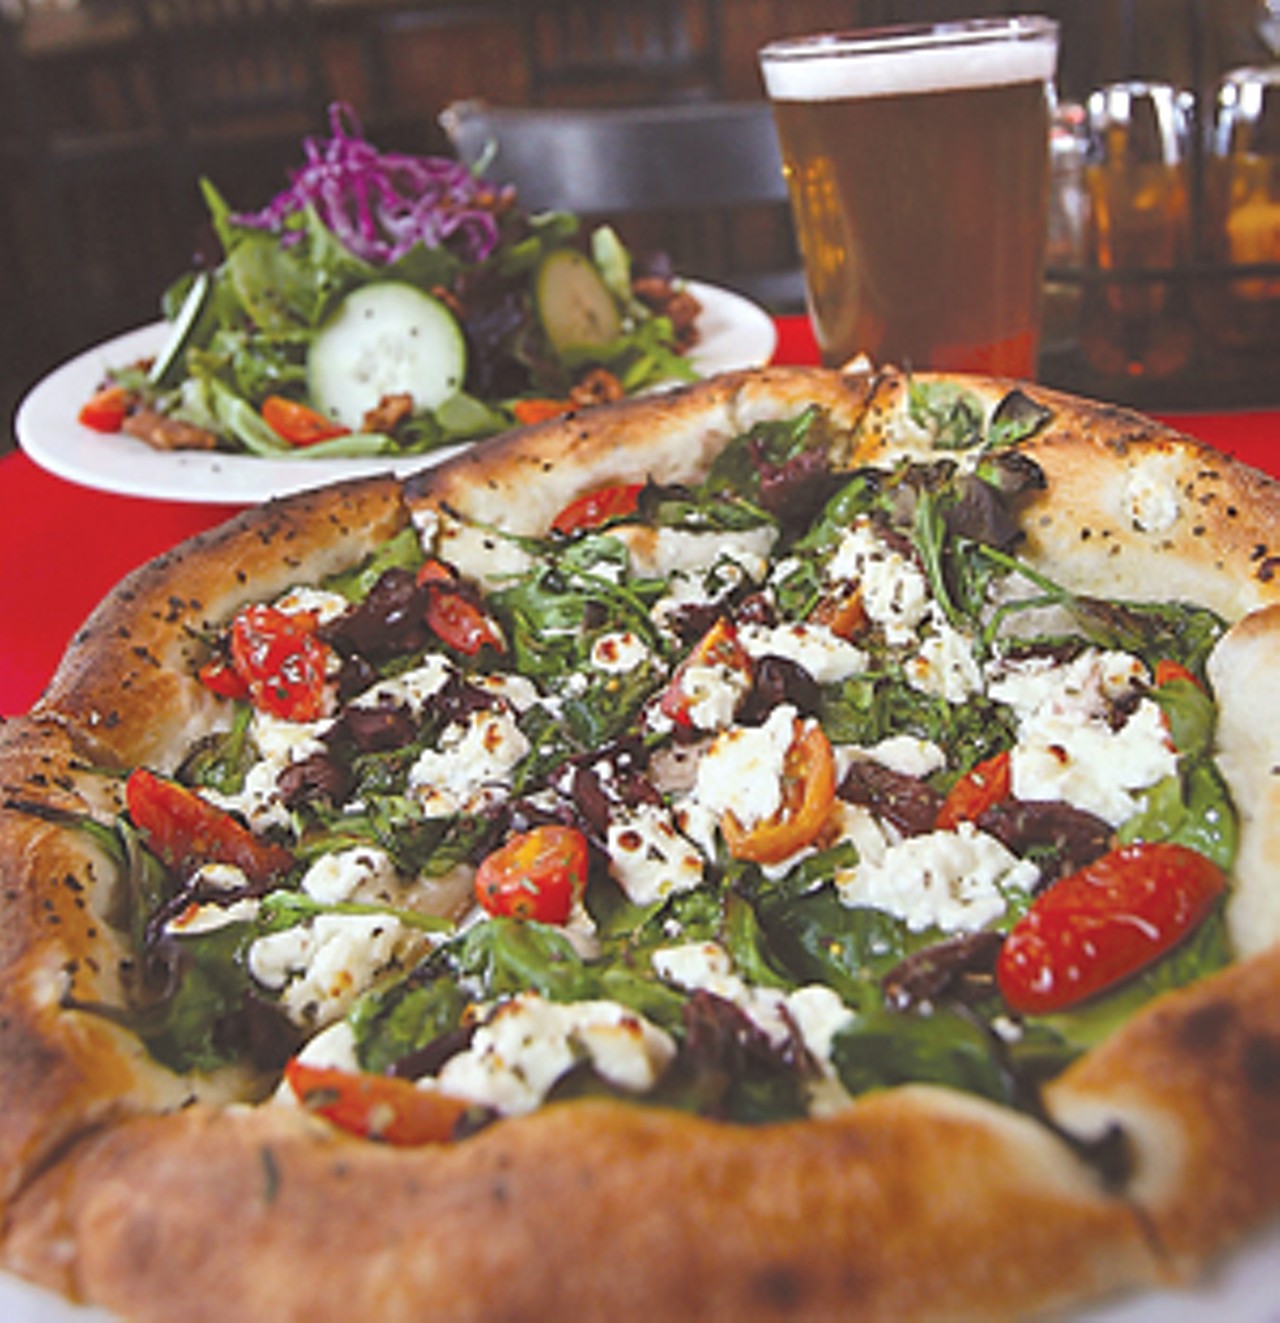 Motor City Brewing Works serves up carefully constructed, brick oven pizzas, most of which are vegetarian, along with a full service bar, beers brewed on site, and events like “This Week in Art.” 
470 W. Canfield St., Detroit; 313-832-2700.